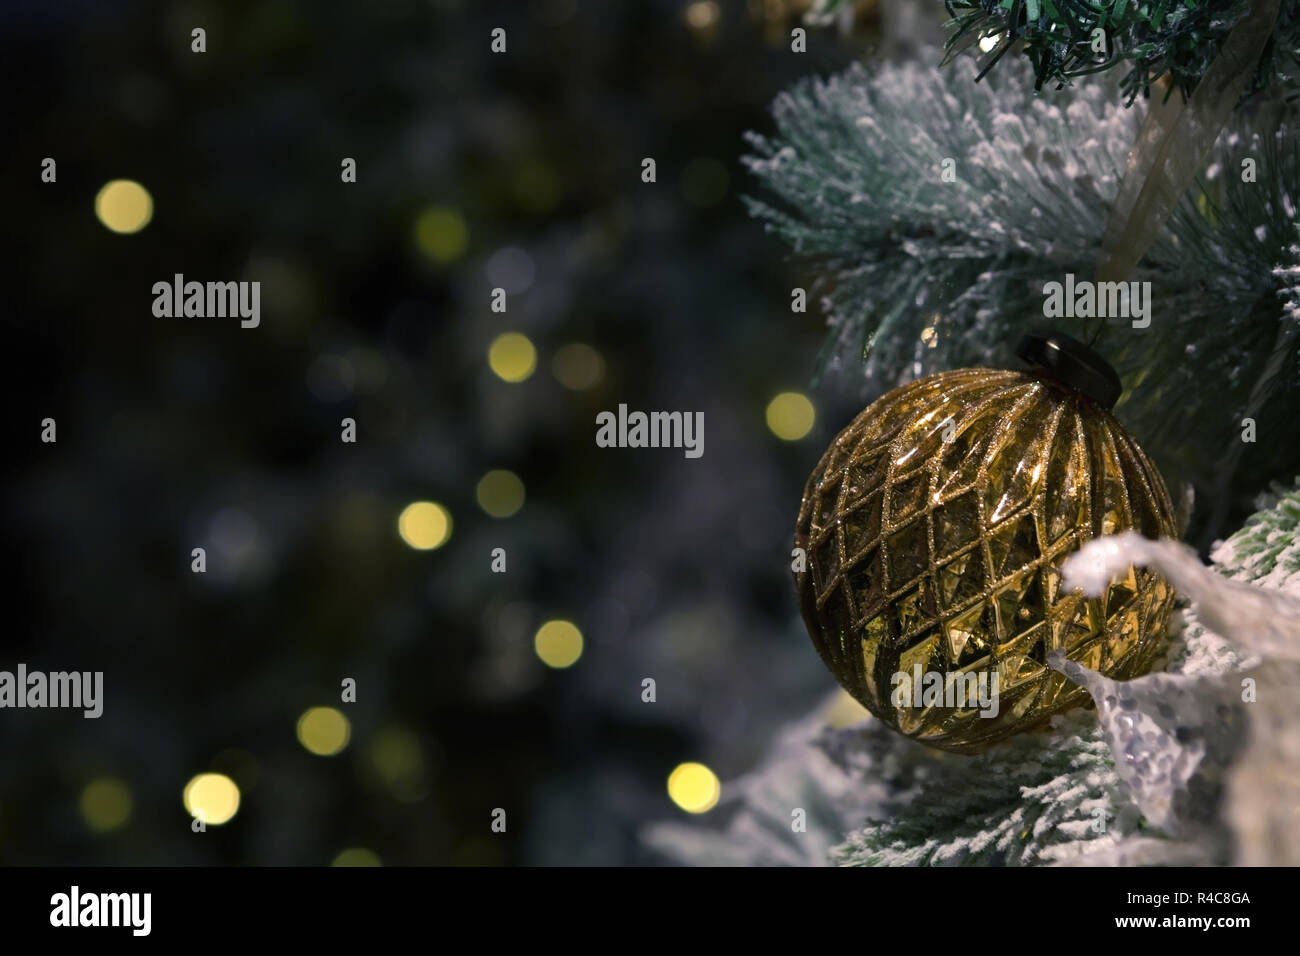 Ultra Zoomed View of Fully Decorated Winter Themed Christmas Tree Stock Photo